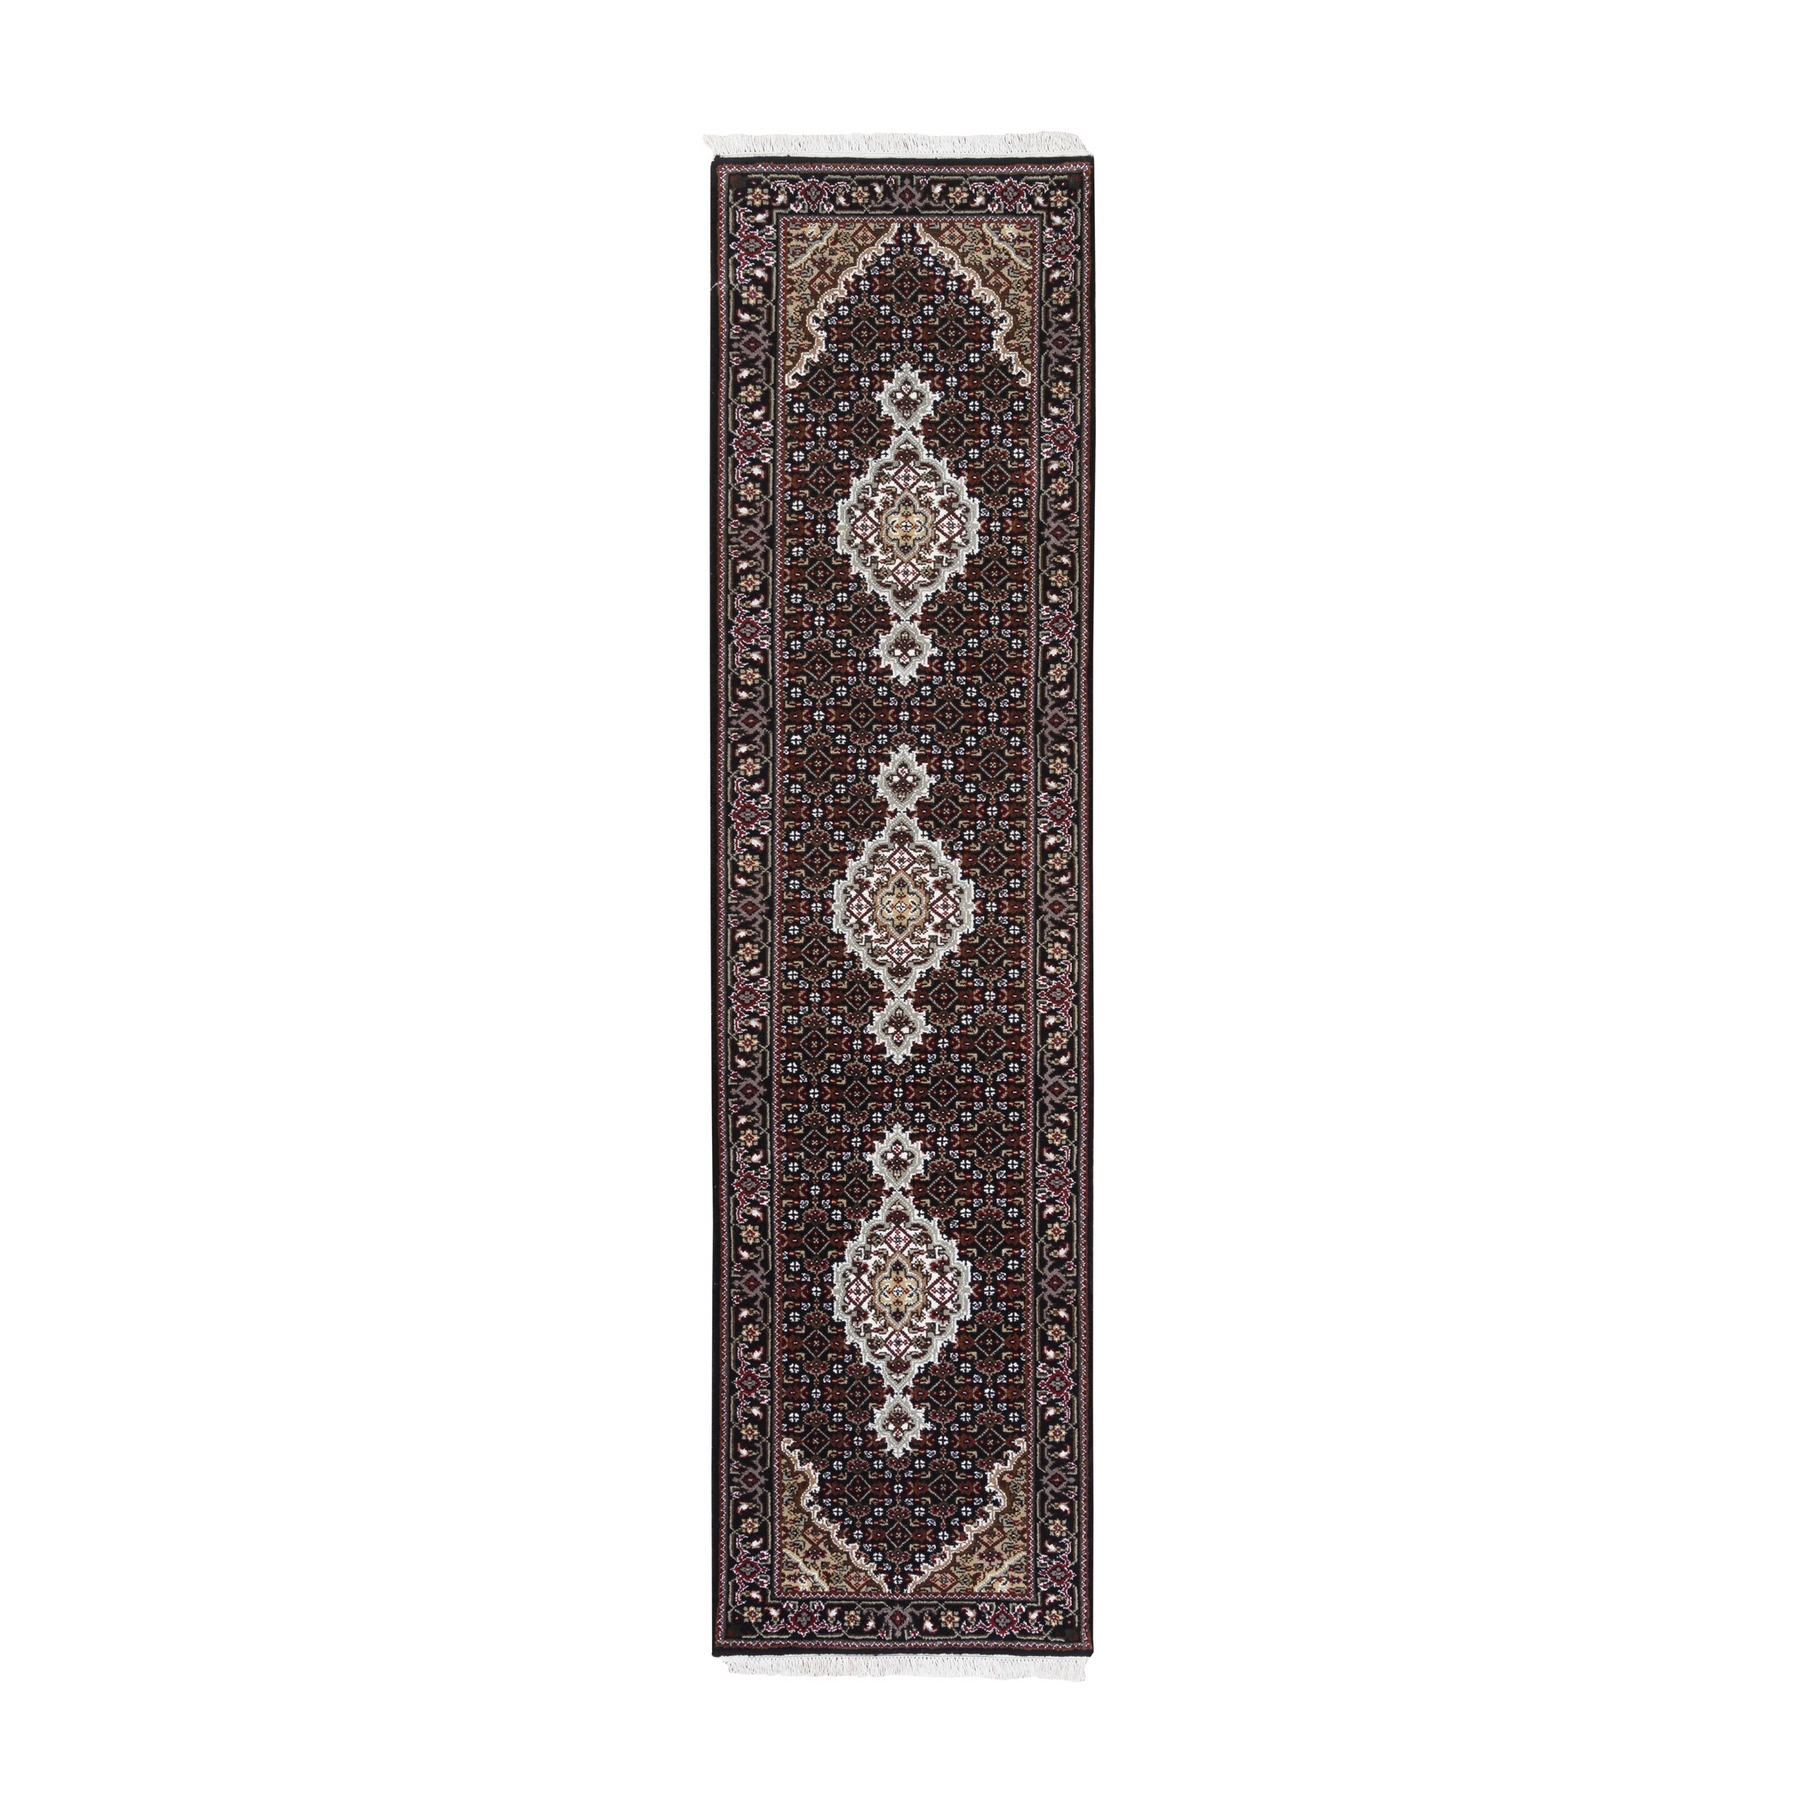 Pirniakan Collection Hand Knotted Black Rug No: 1124932